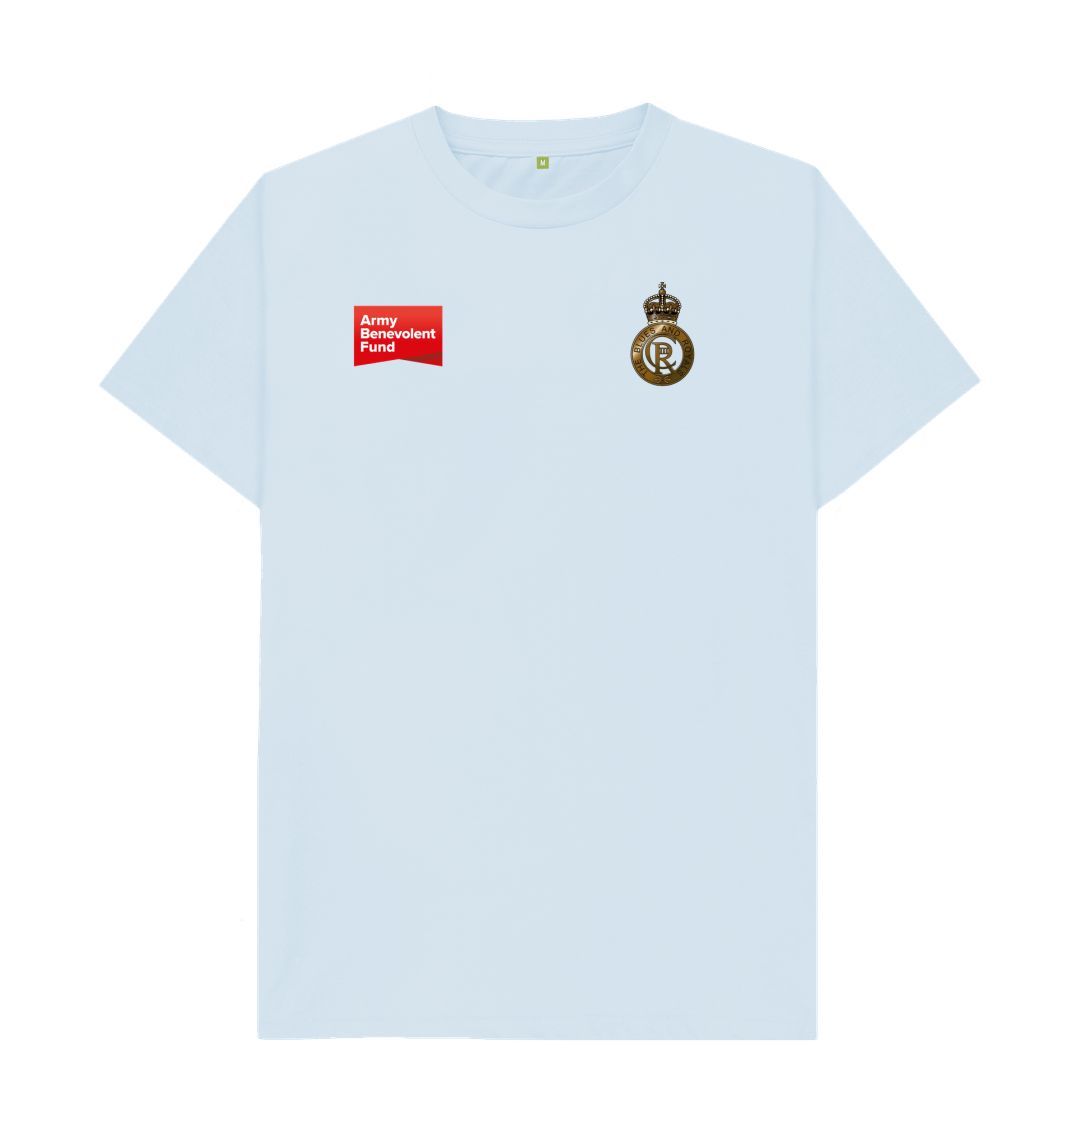 The Blues and Royals Unisex T-shirt - Army Benevolent Fund